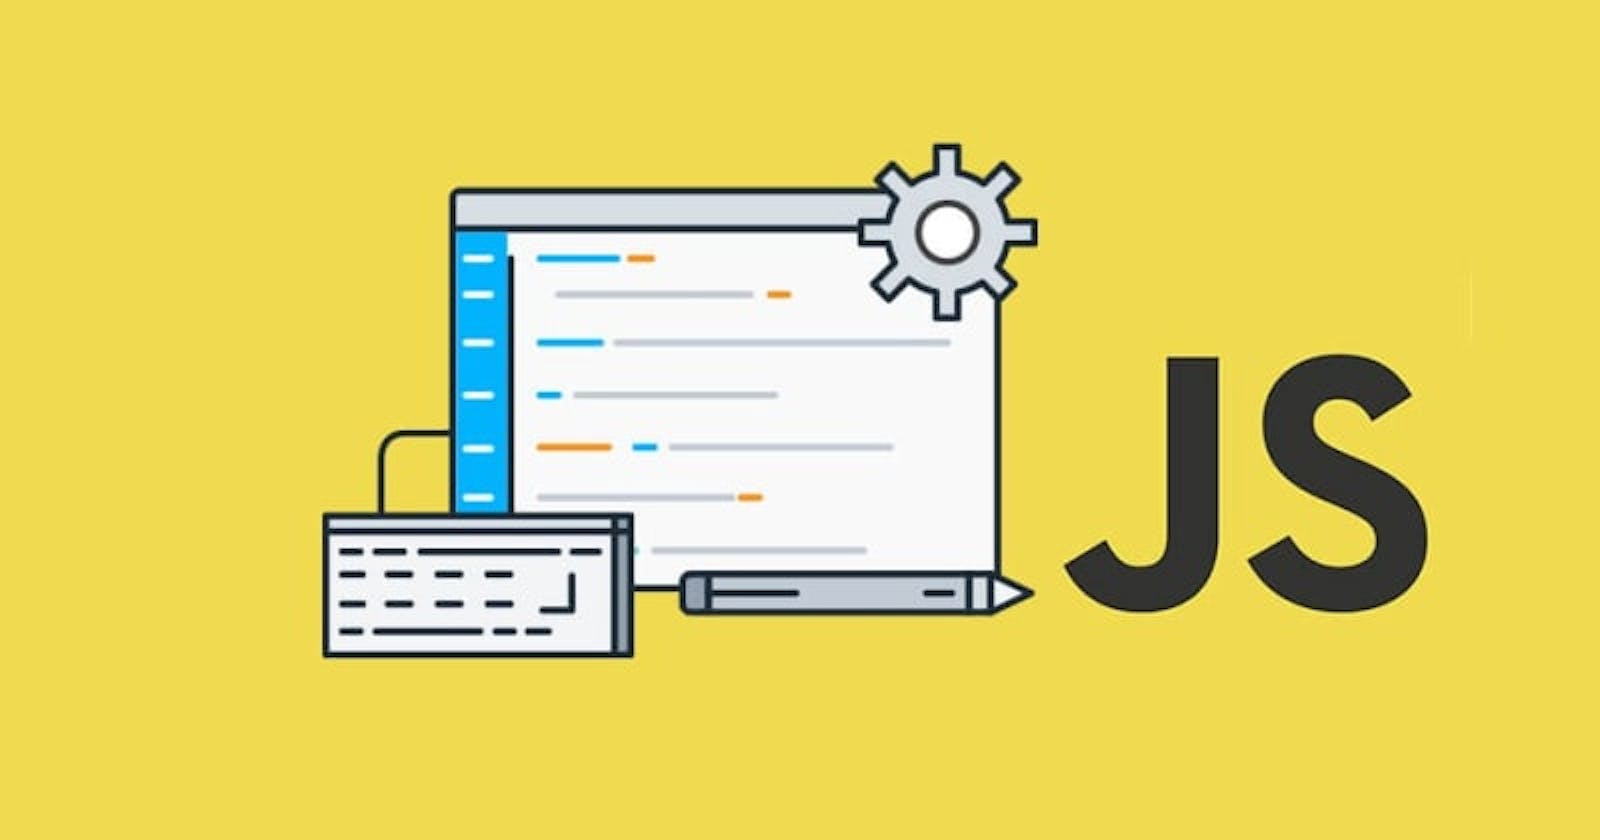 Possible ways to iterate a string in JavaScript